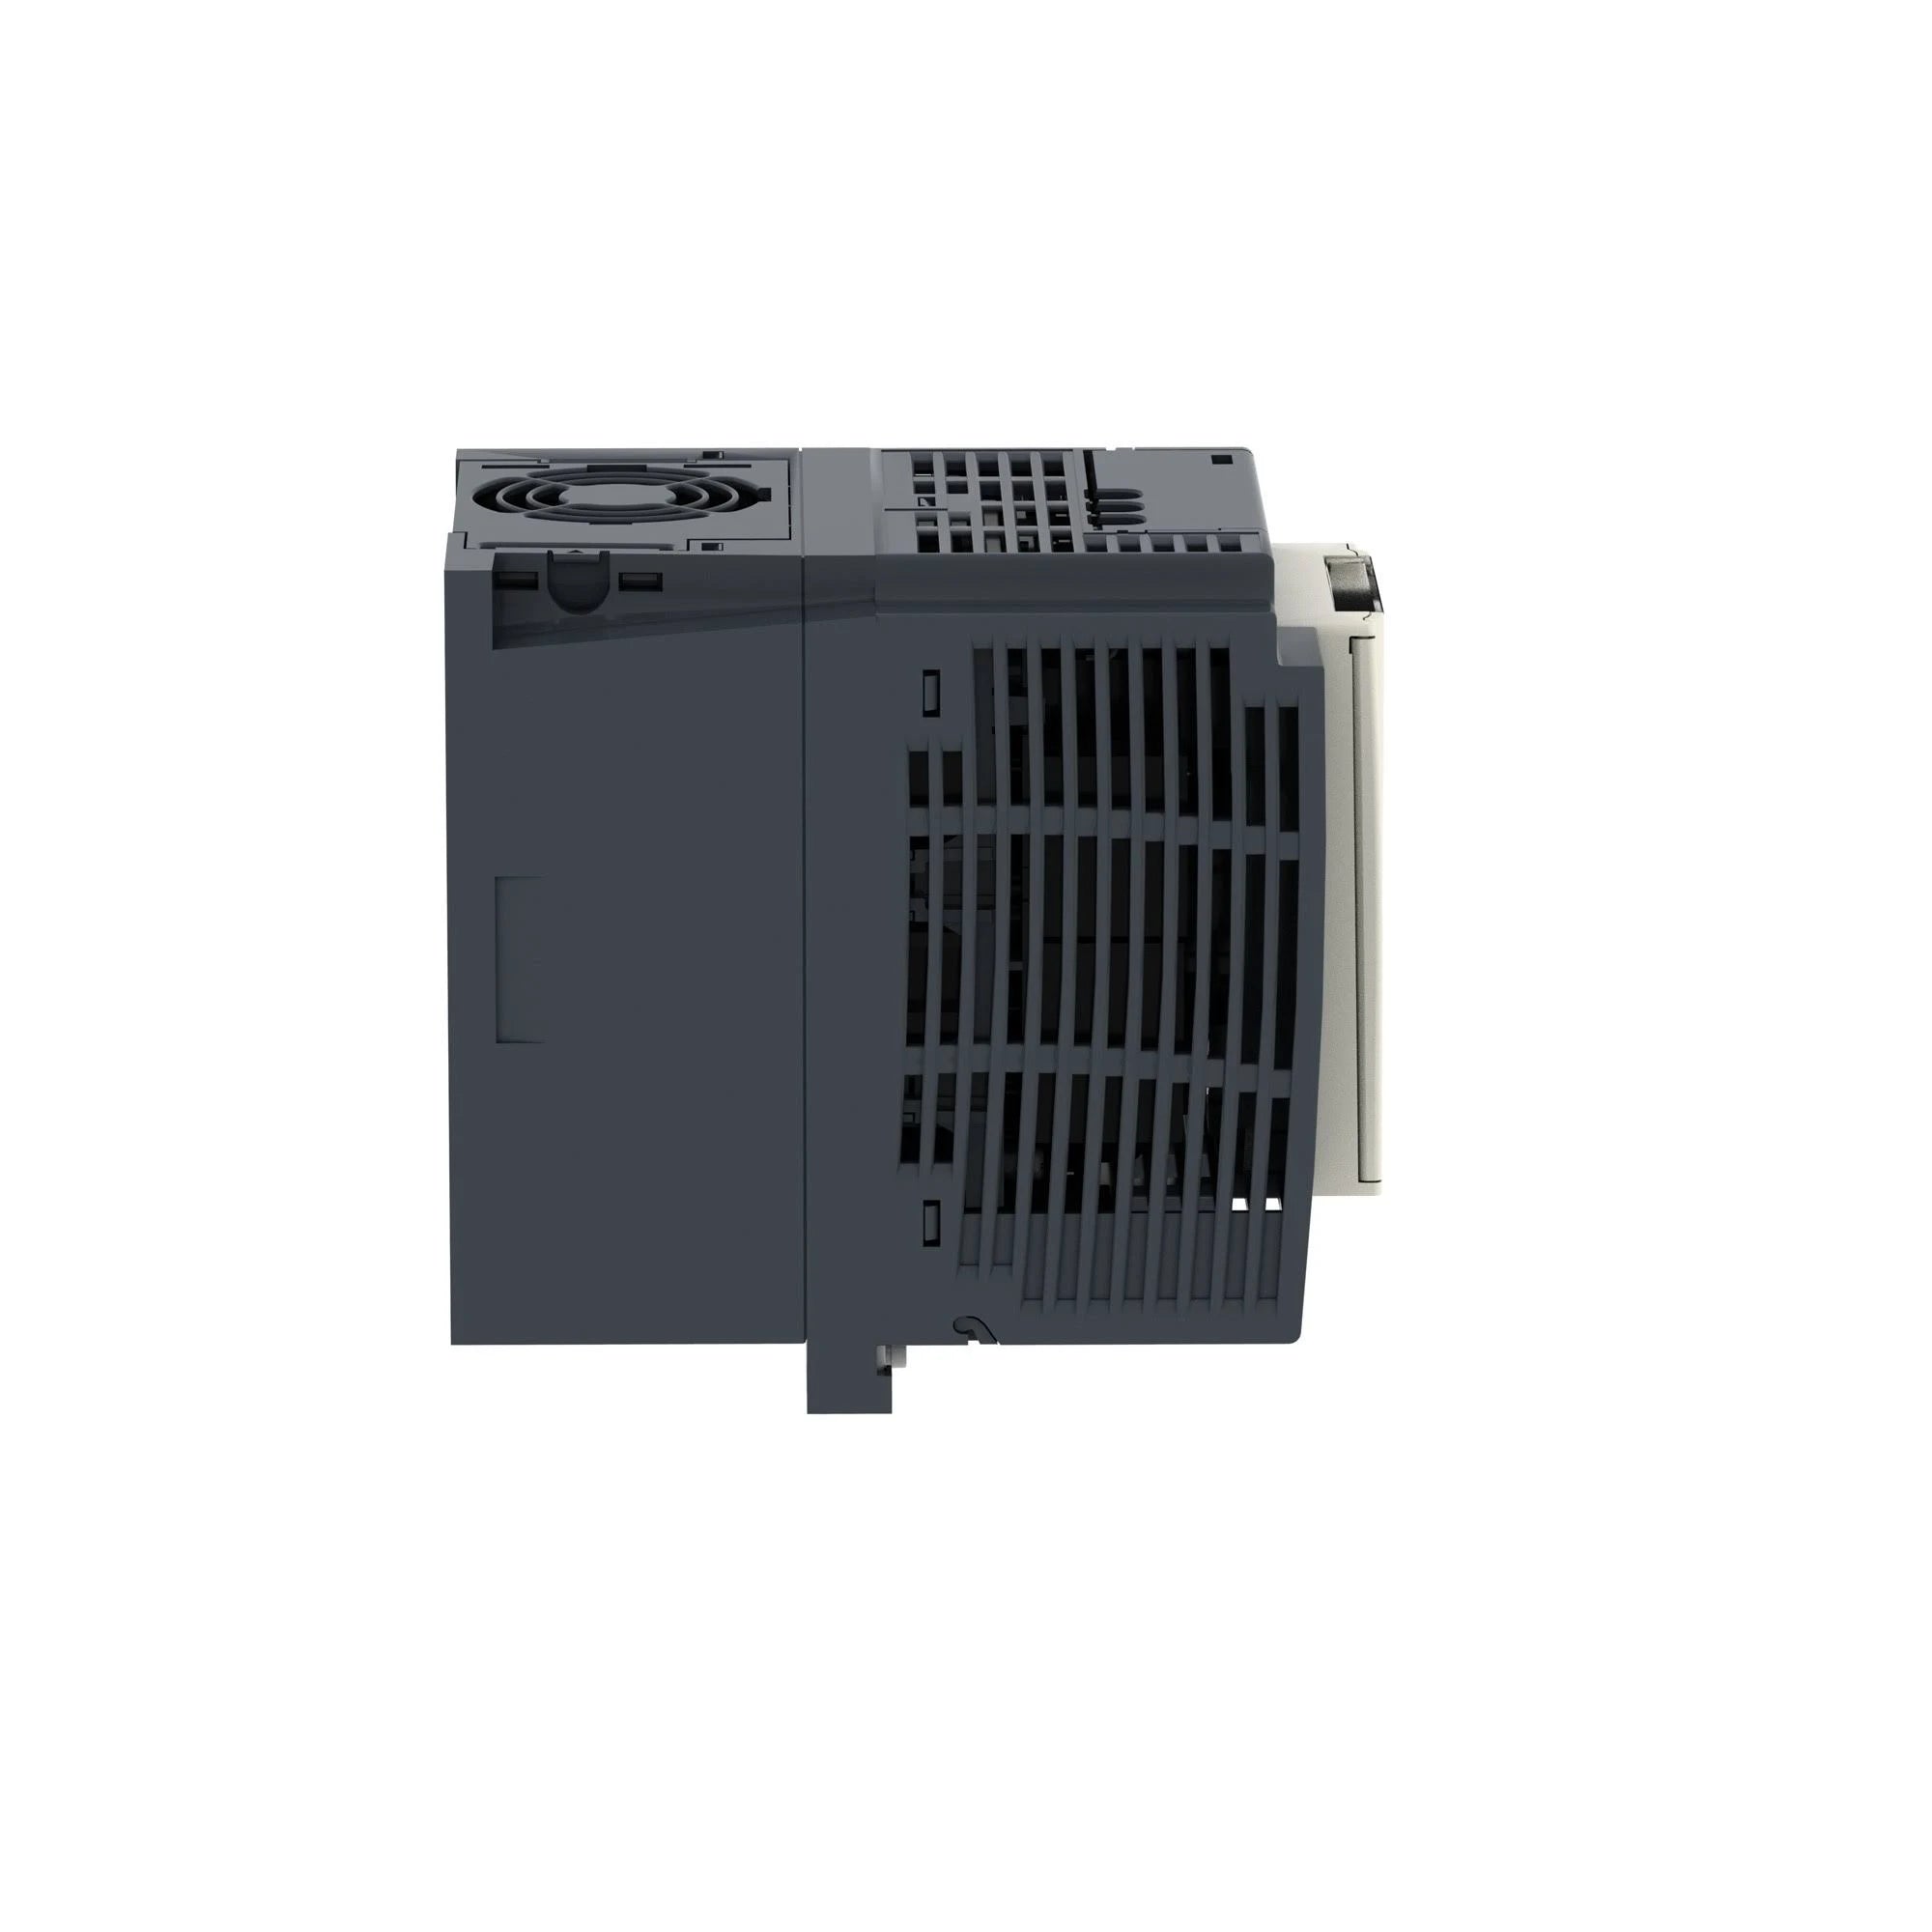 ATV12HU15M2 | Schneider Electric Variable speed drive, Altivar 12, 1.5kW, 2hp, 200 to 240V, 1 phase, with heat sink